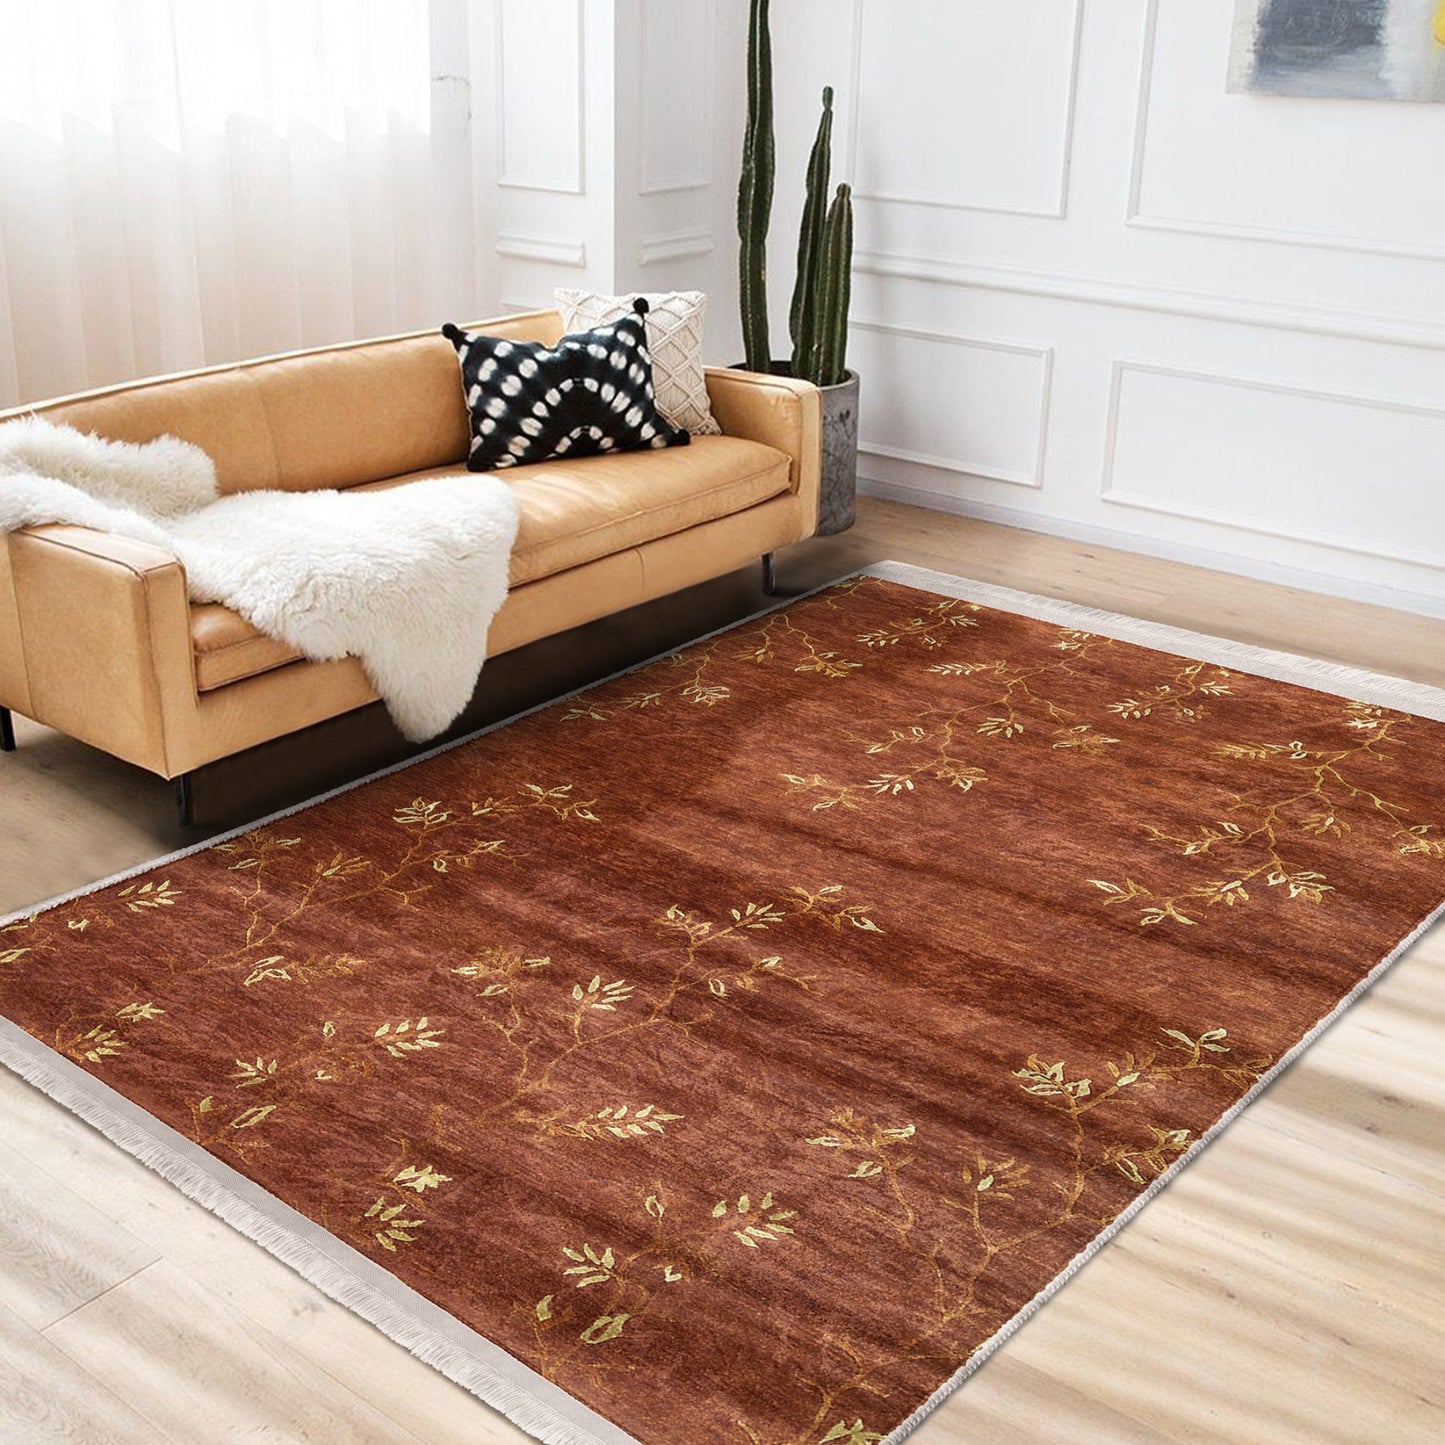 Decorative Rug with Classic Charm and Botanical Design